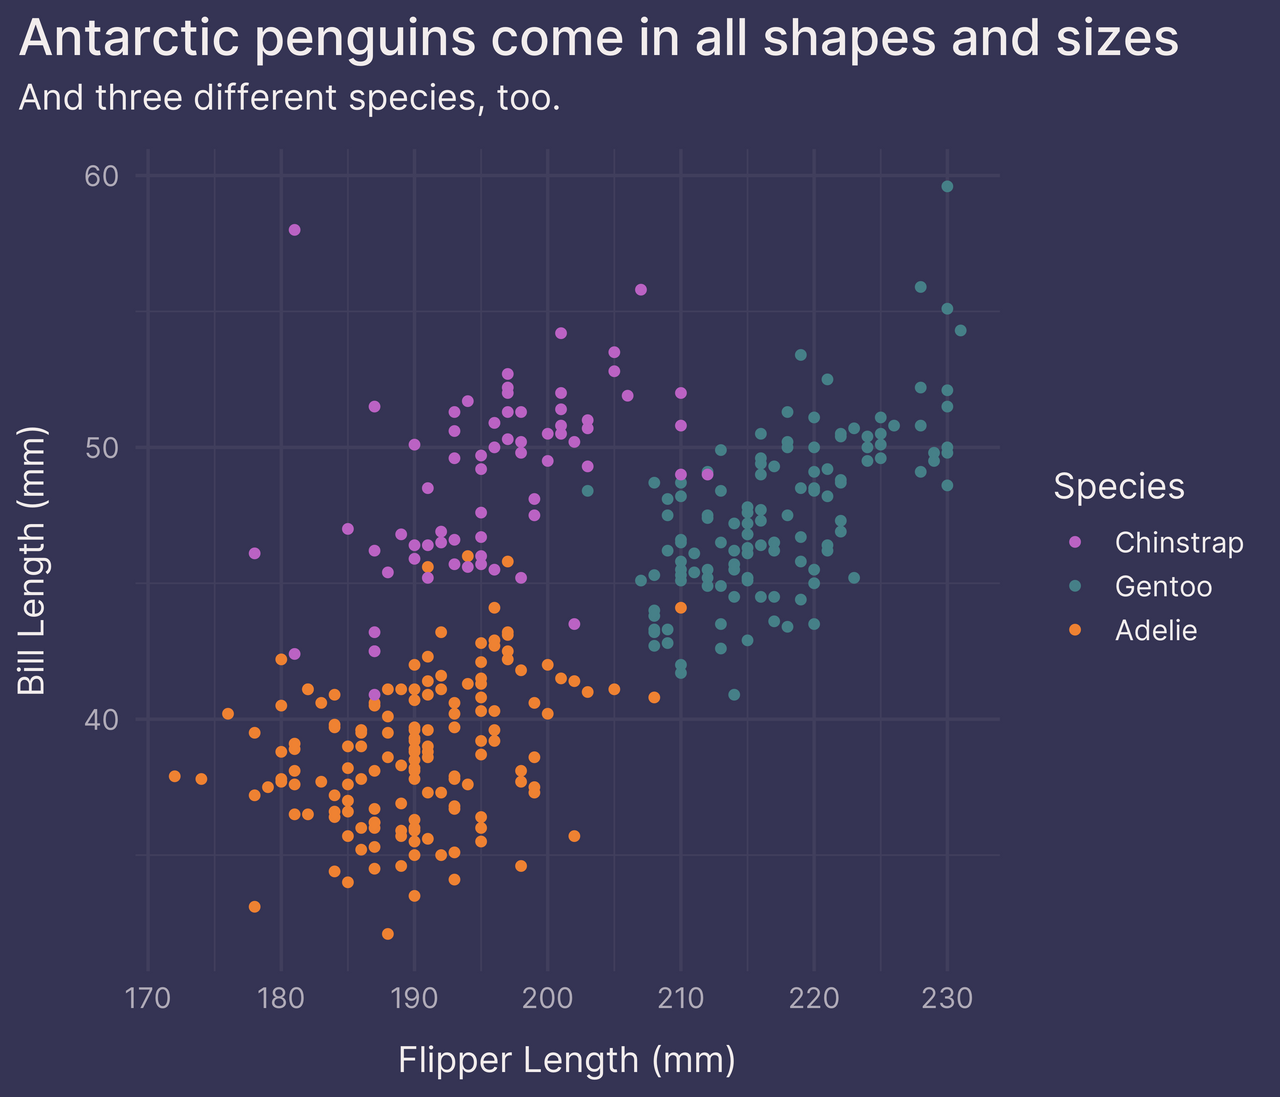 Scatter plot of penguin dimensions with legend on right side